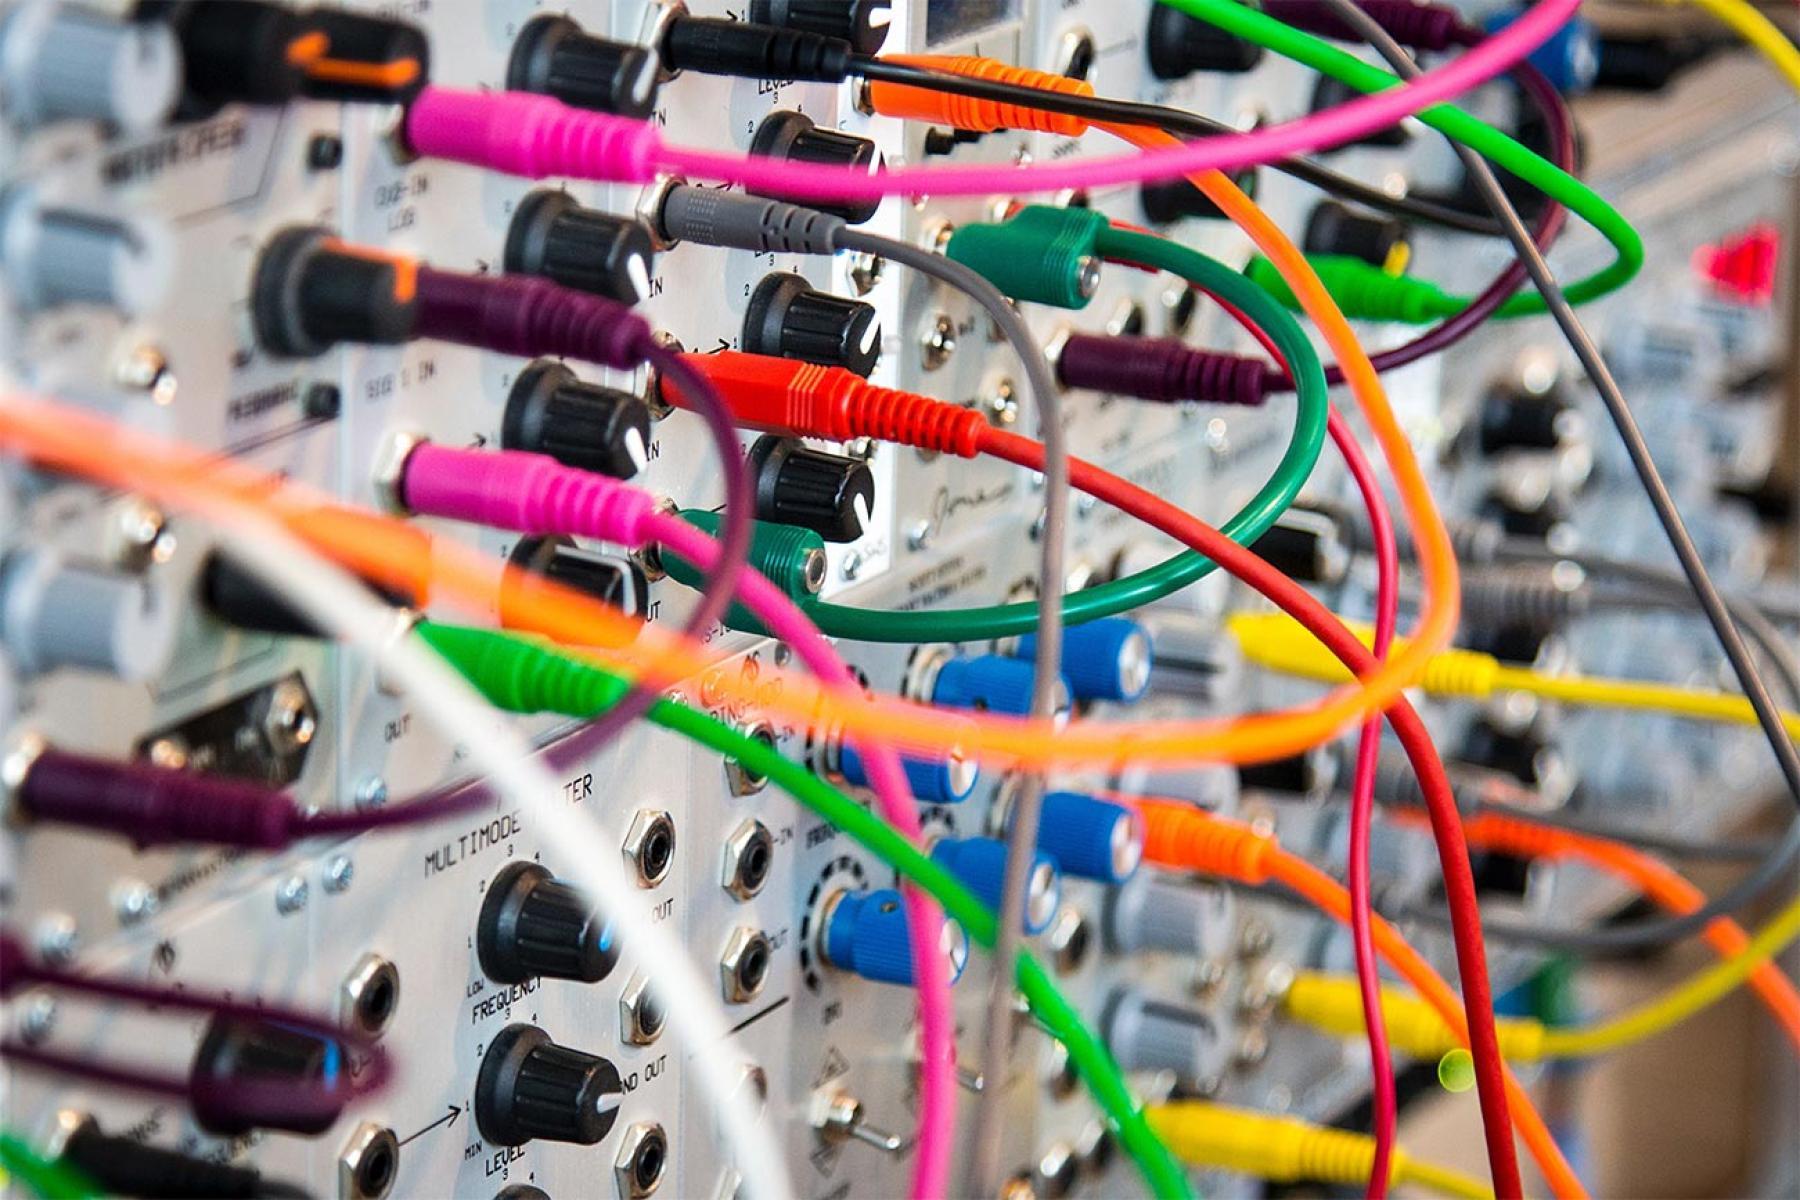 Colourful patch cables plugged into complex device